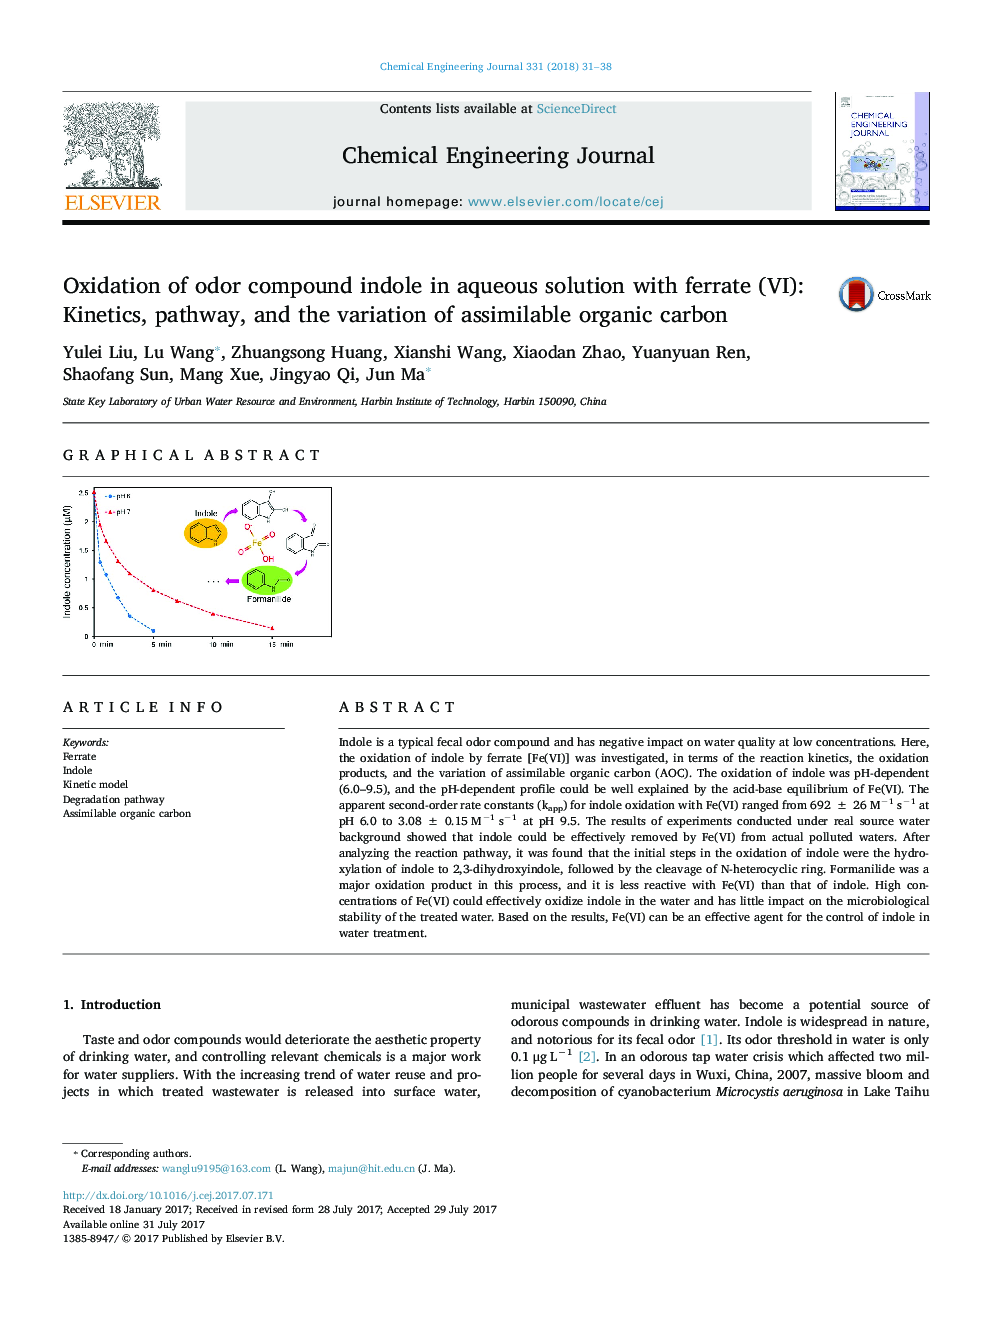 Oxidation of odor compound indole in aqueous solution with ferrate (VI): Kinetics, pathway, and the variation of assimilable organic carbon